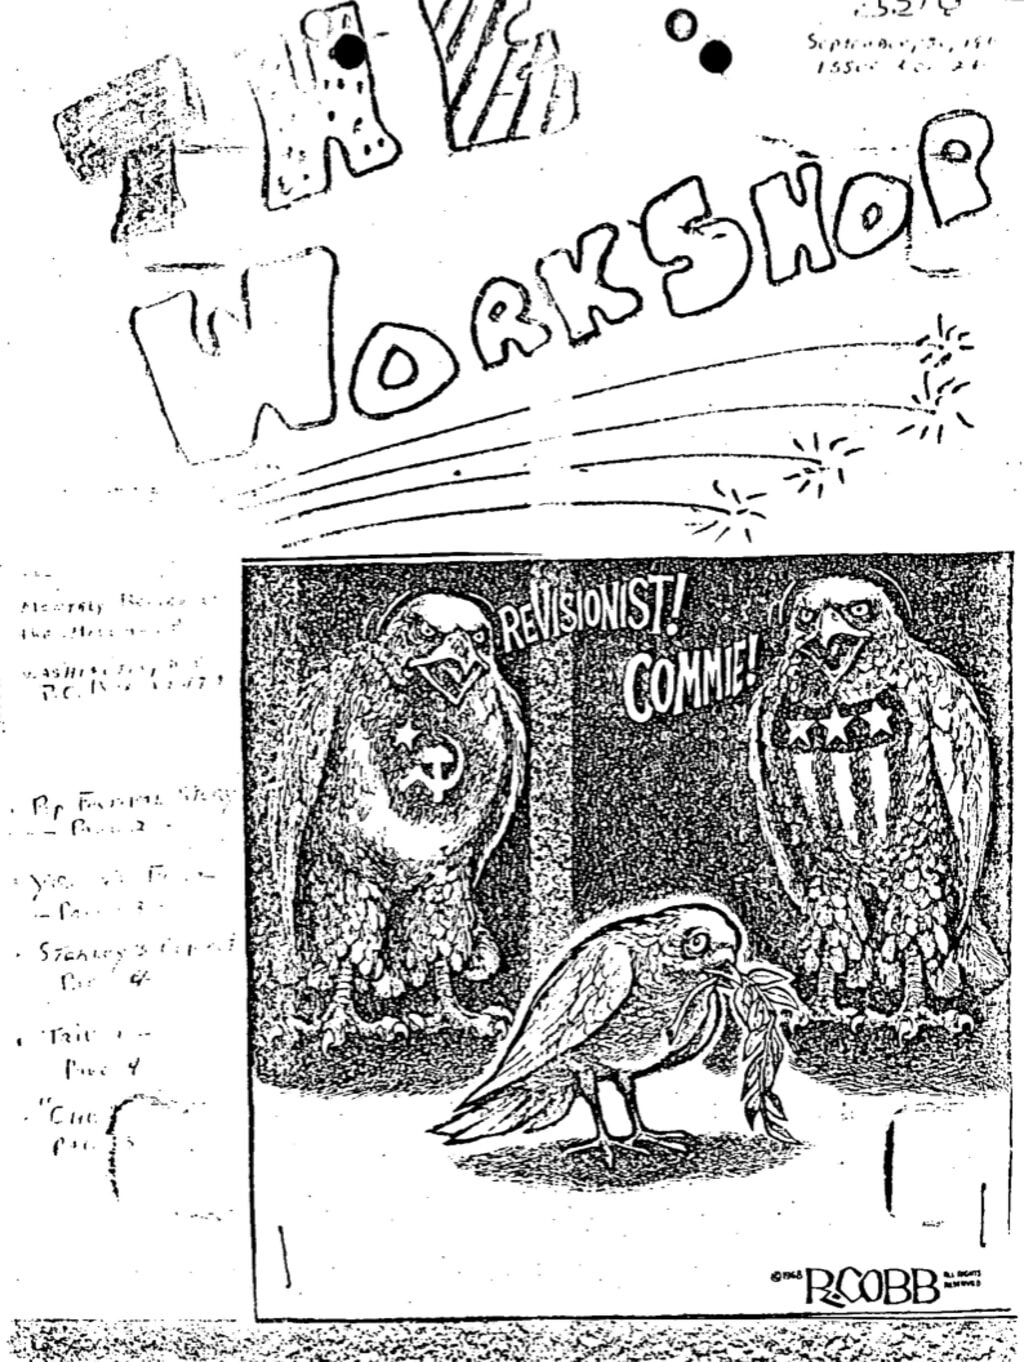 front cover FBI anarchist zine cointelpro